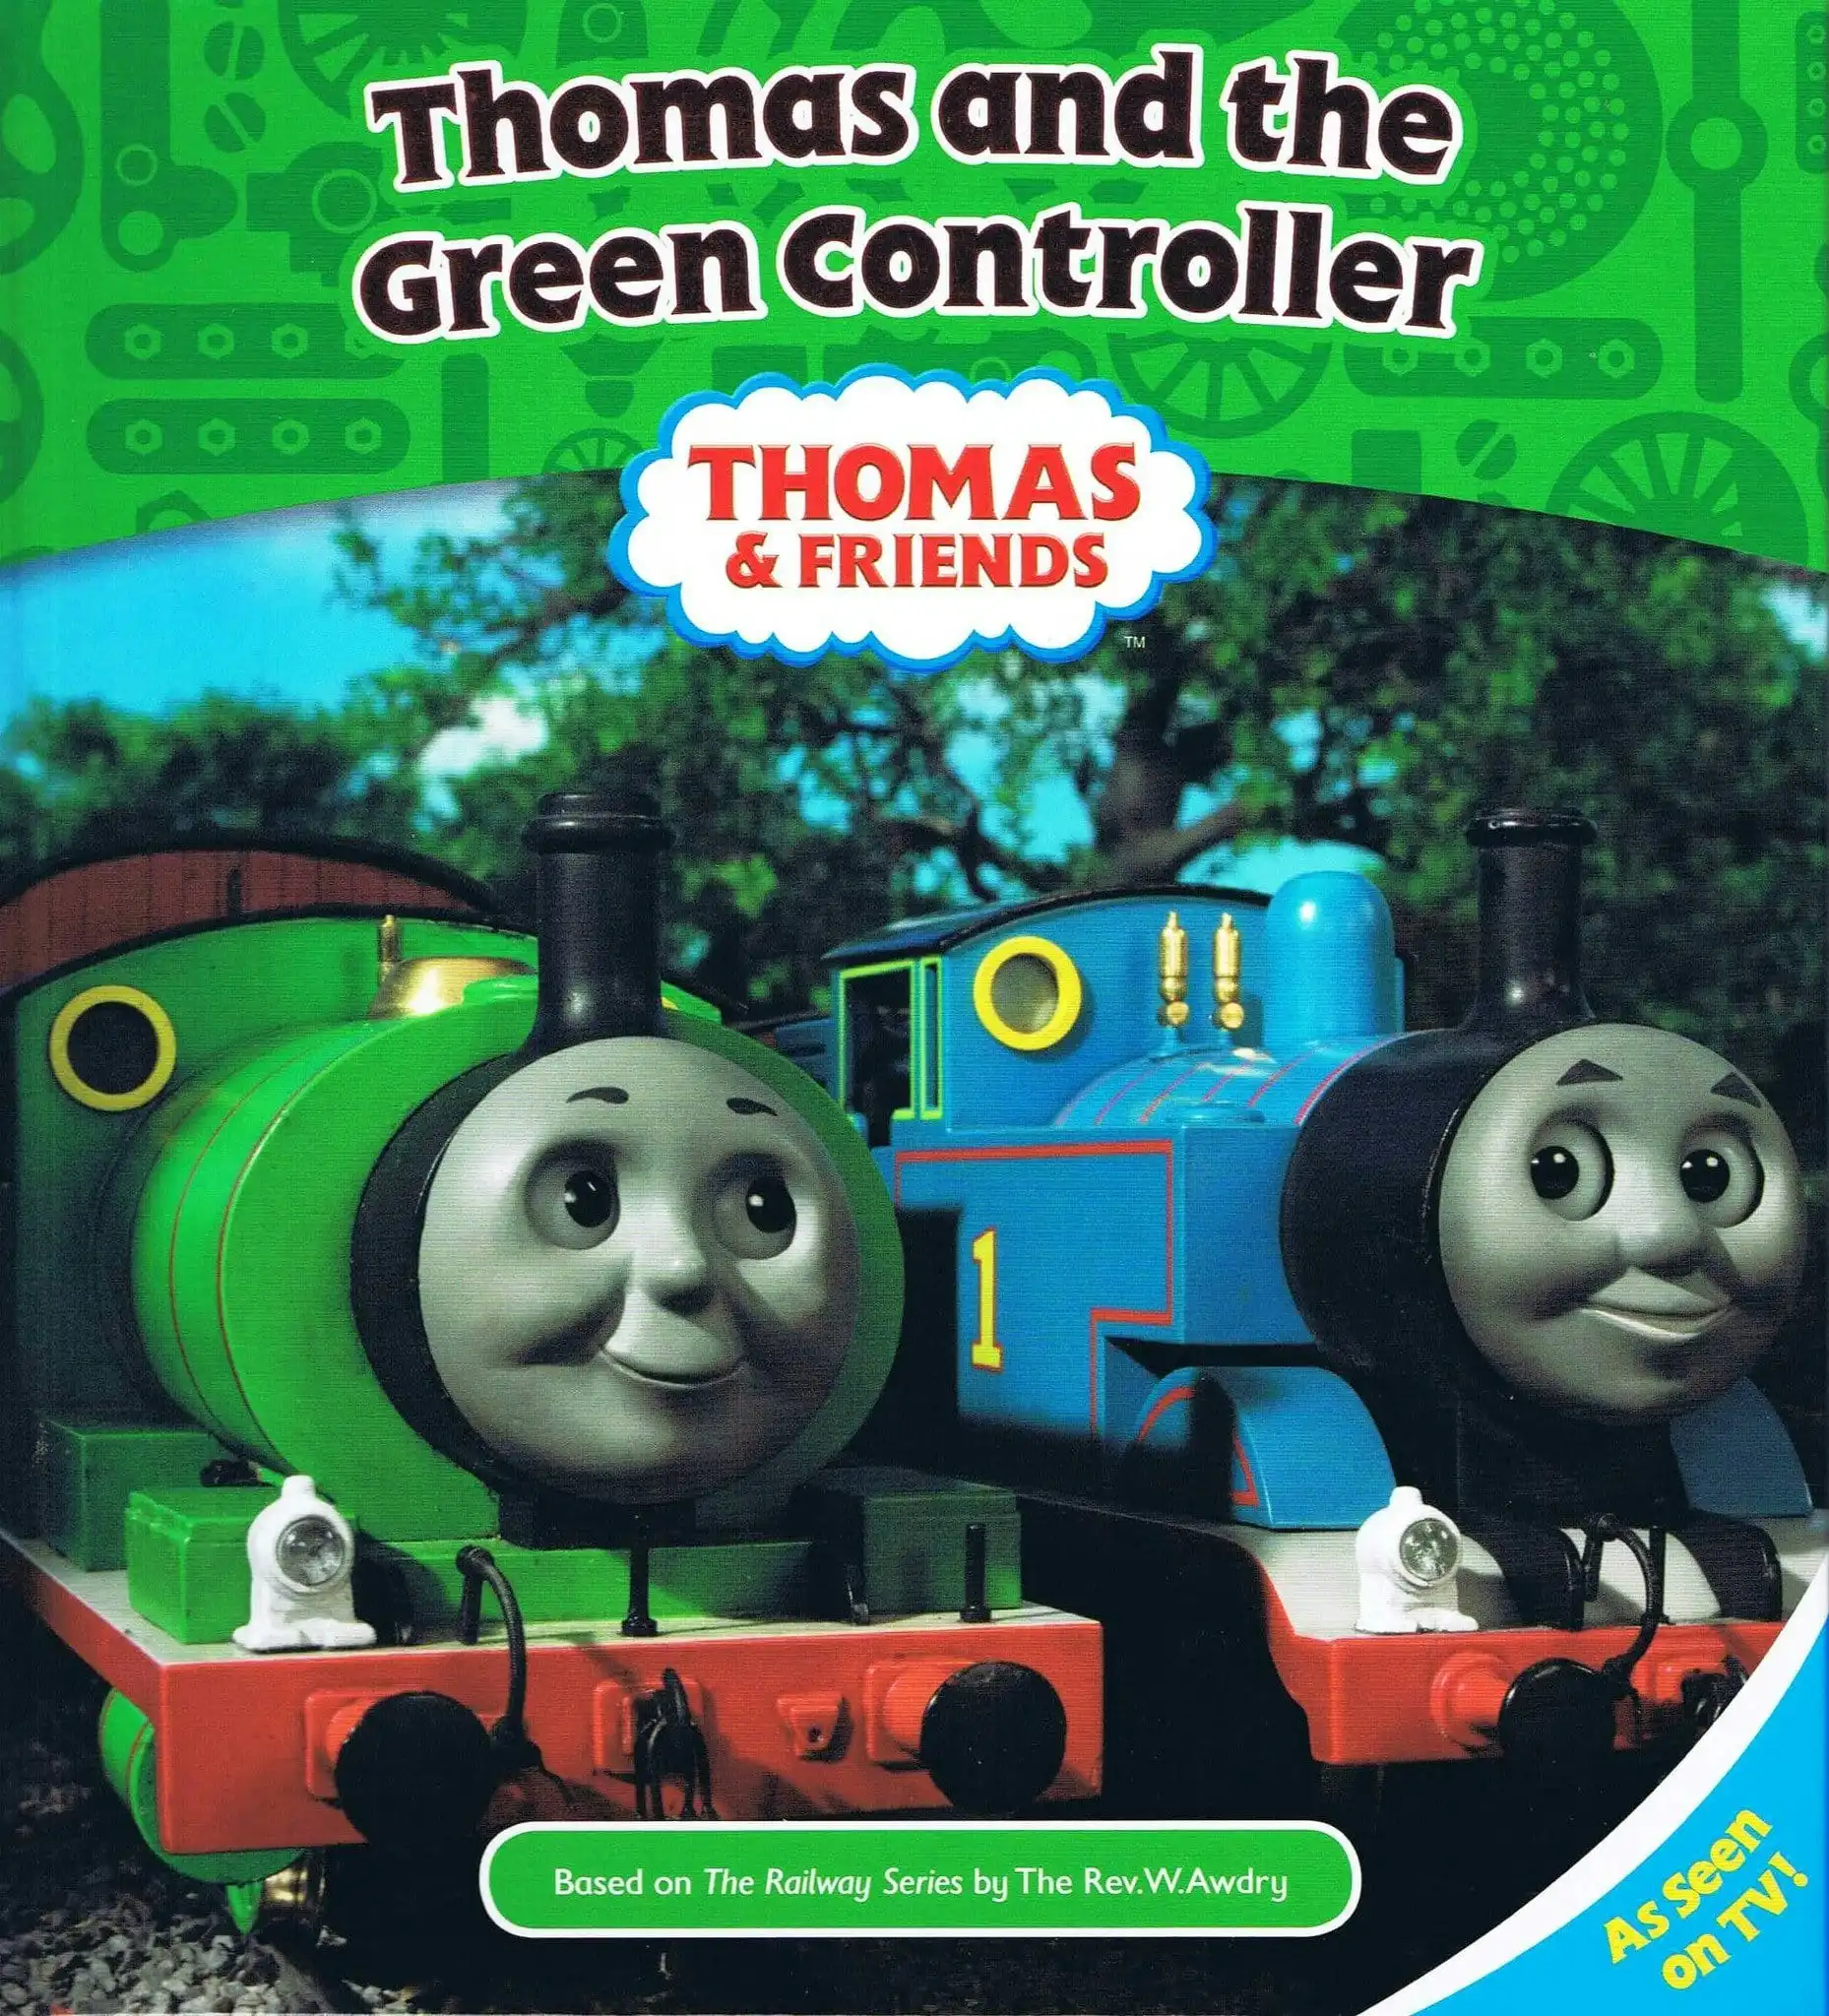 Thomas And The Green Controller, by The Rev. W. Awdry.